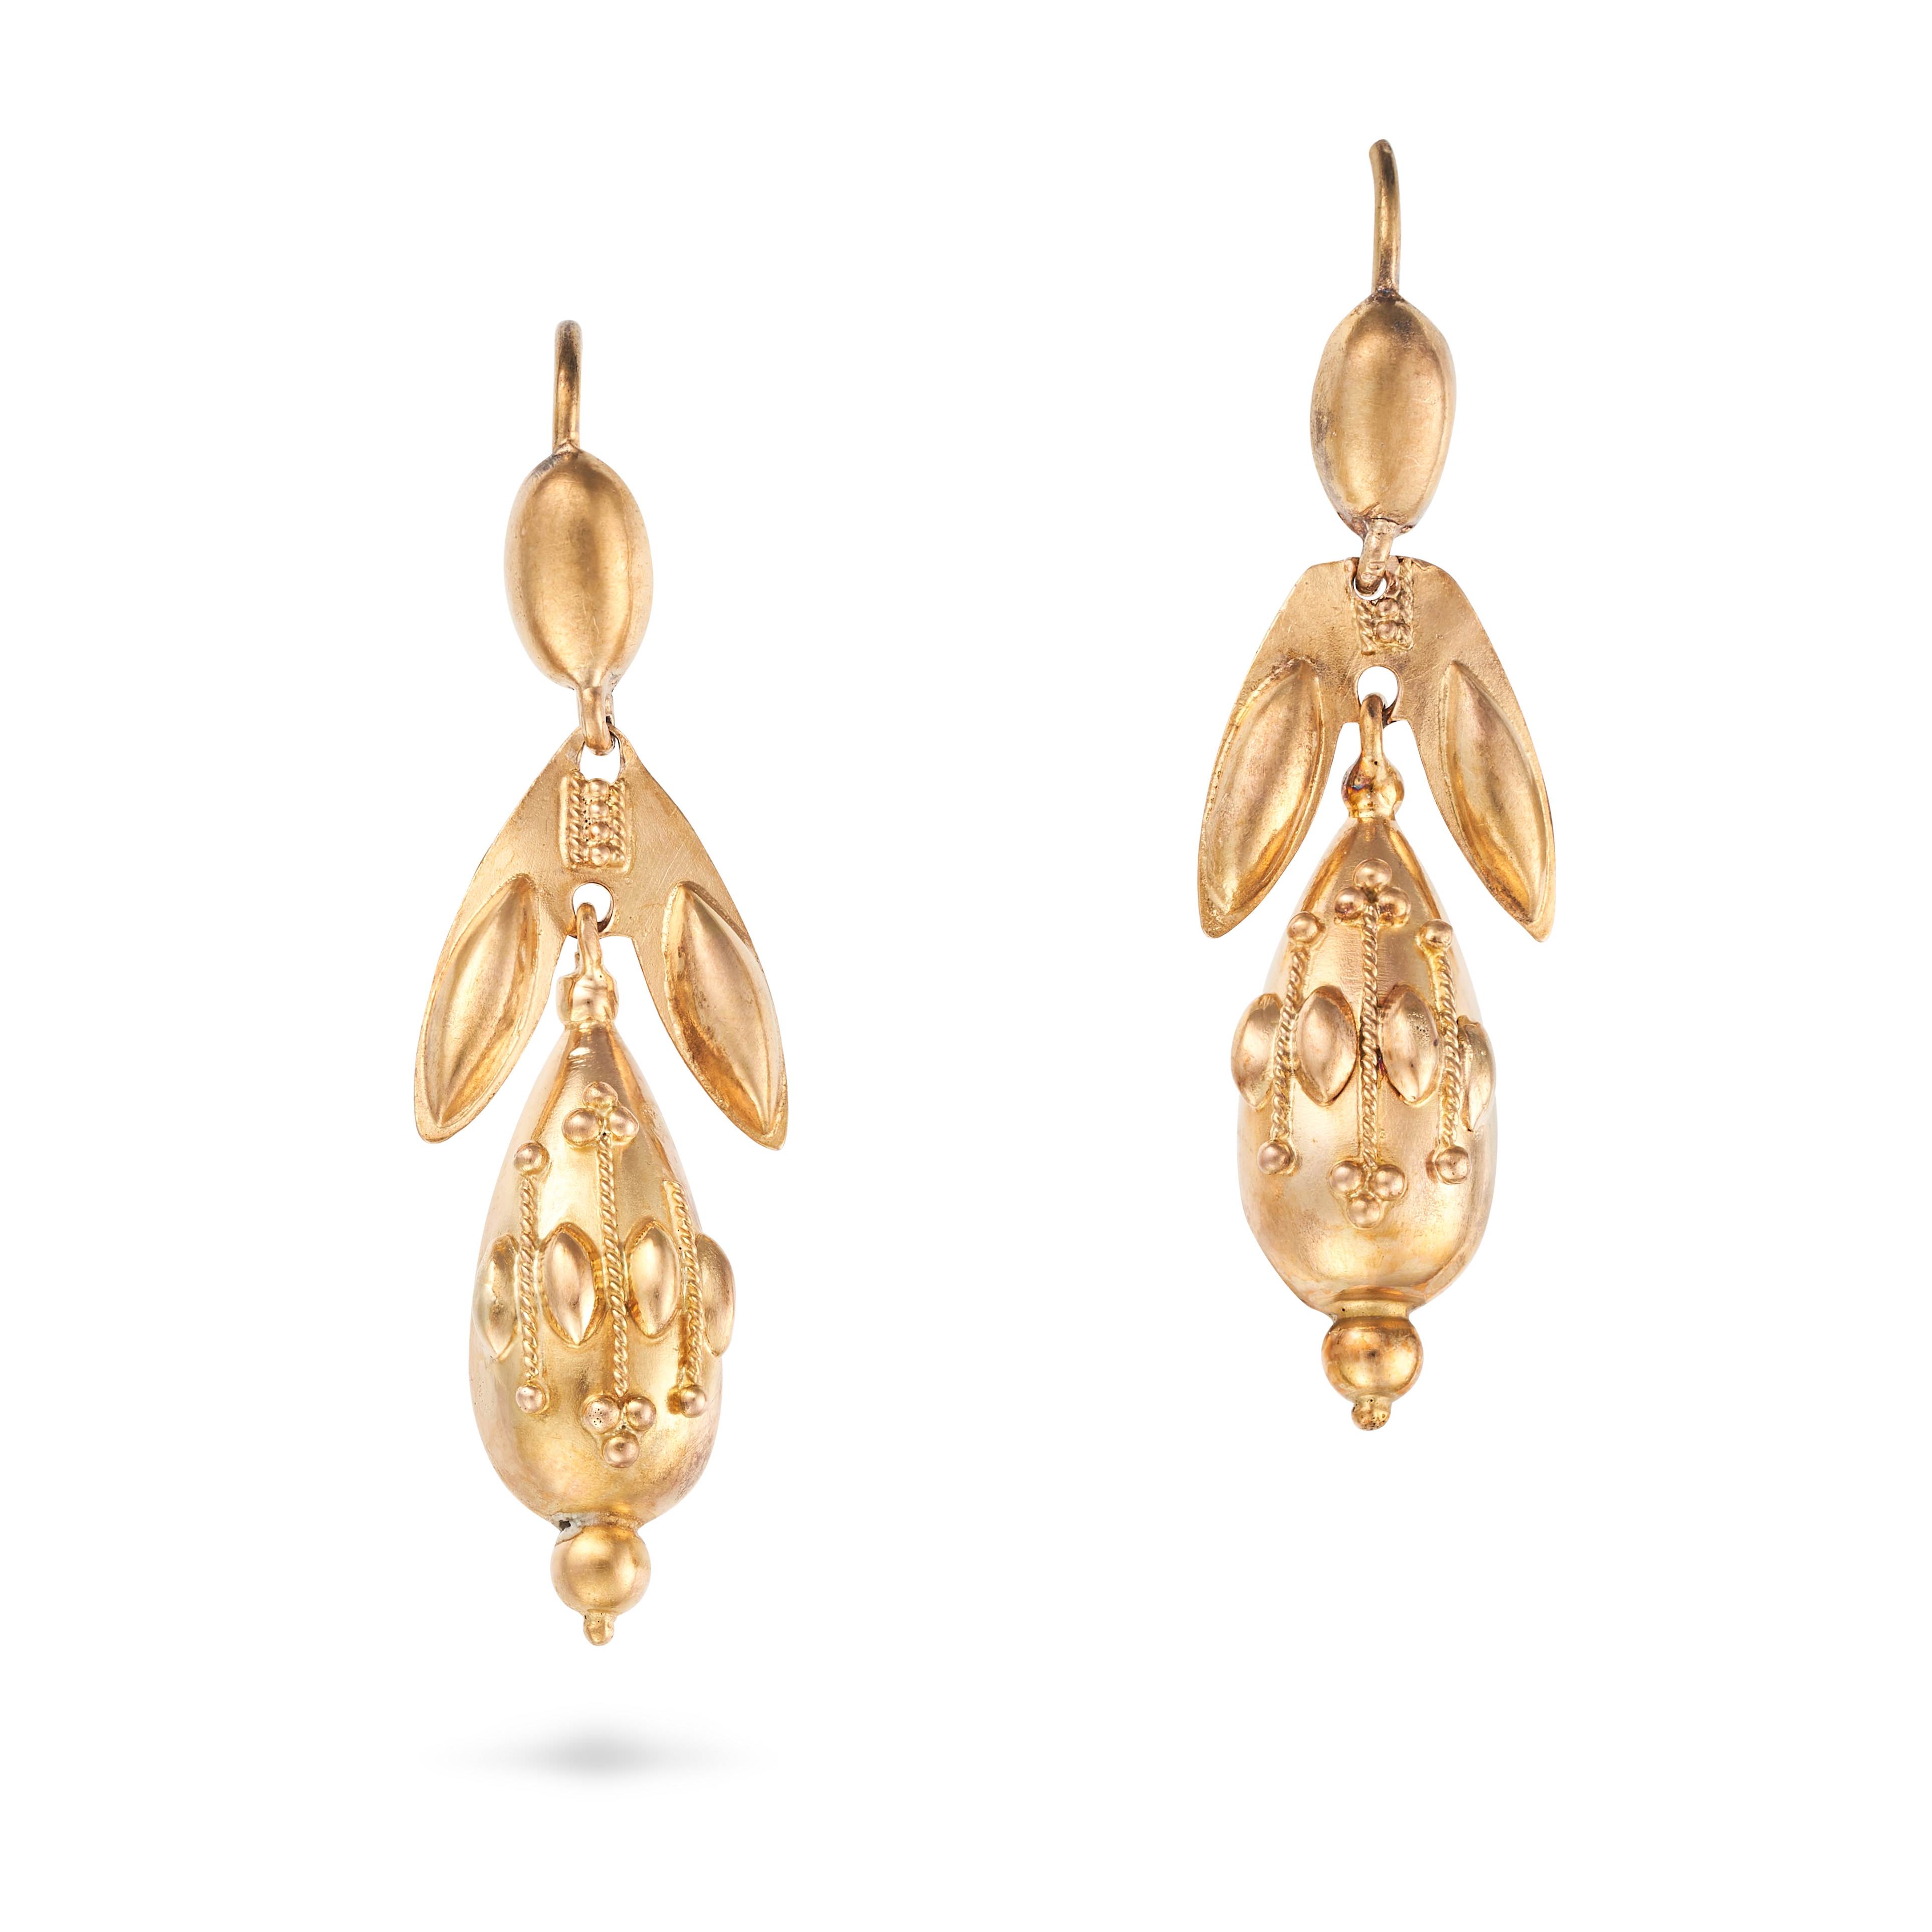 A PAIR OF ANTIQUE DROP EARRINGS in yellow gold, each set with a tapering drop accented by rope an...